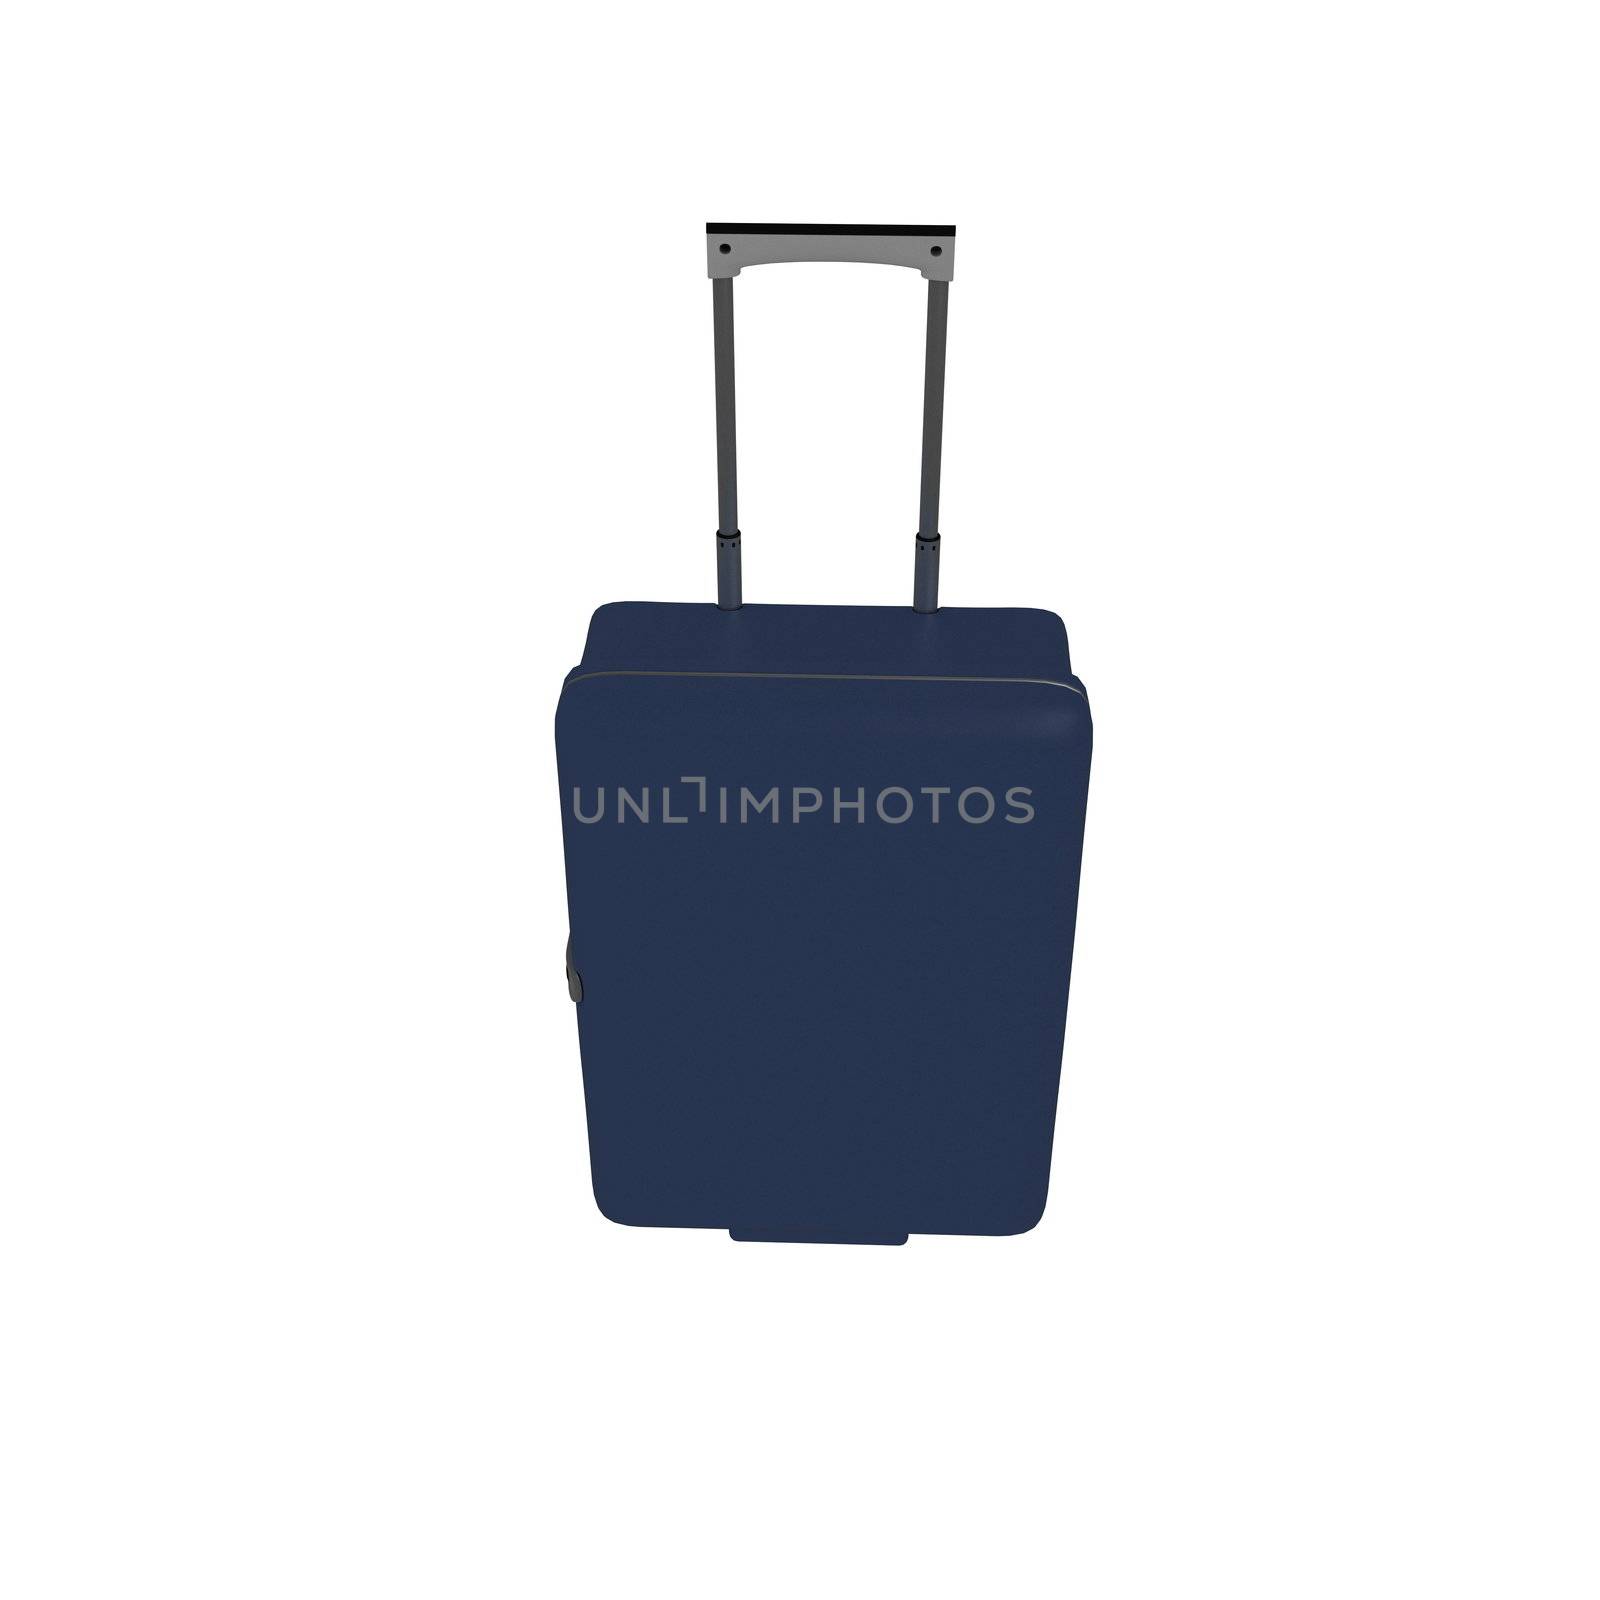 Suitcases isolated on a white background.